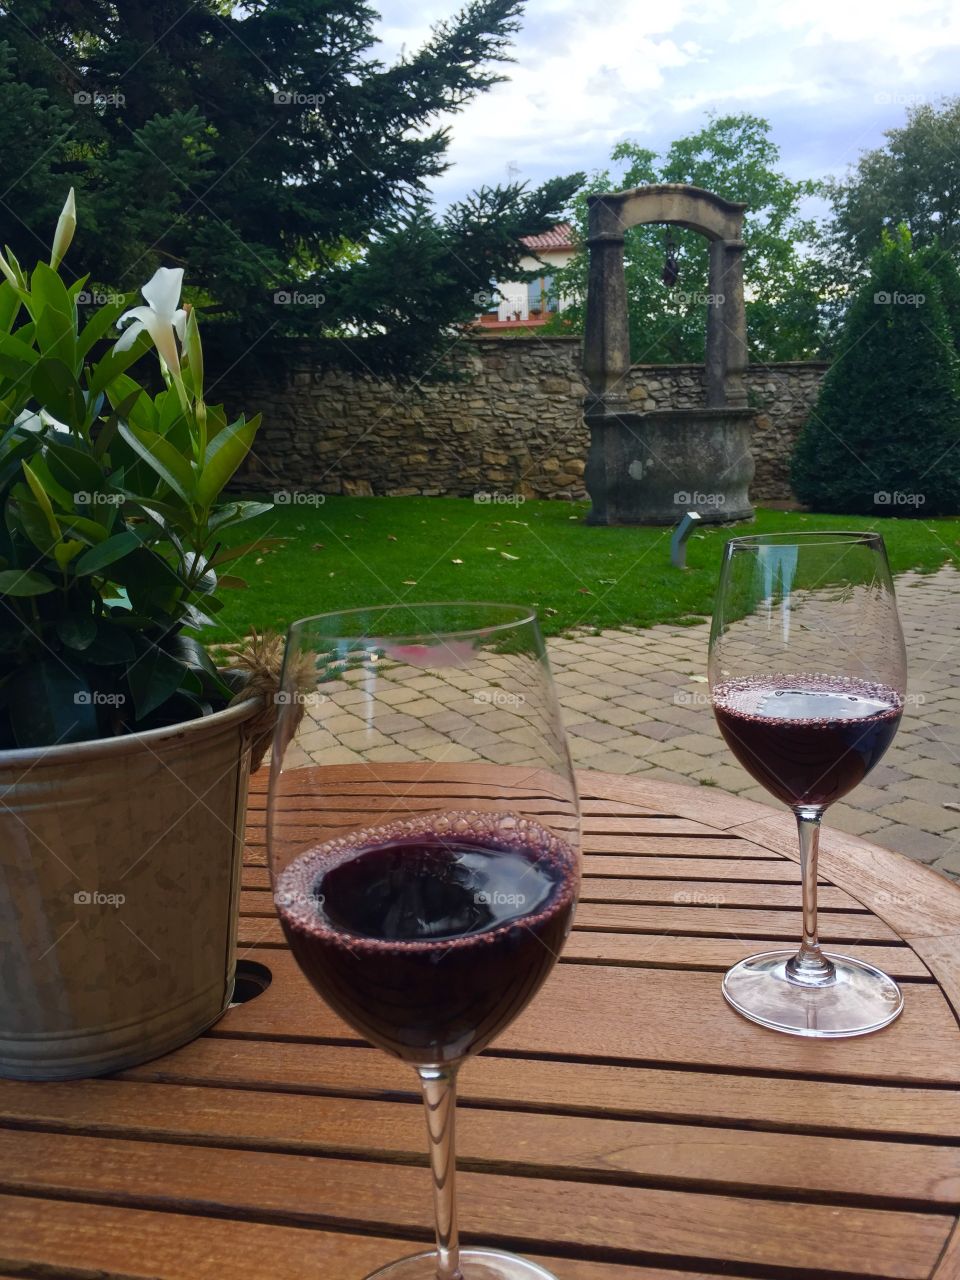 Spanish red wine in a garden setting wig wishing well or water well 